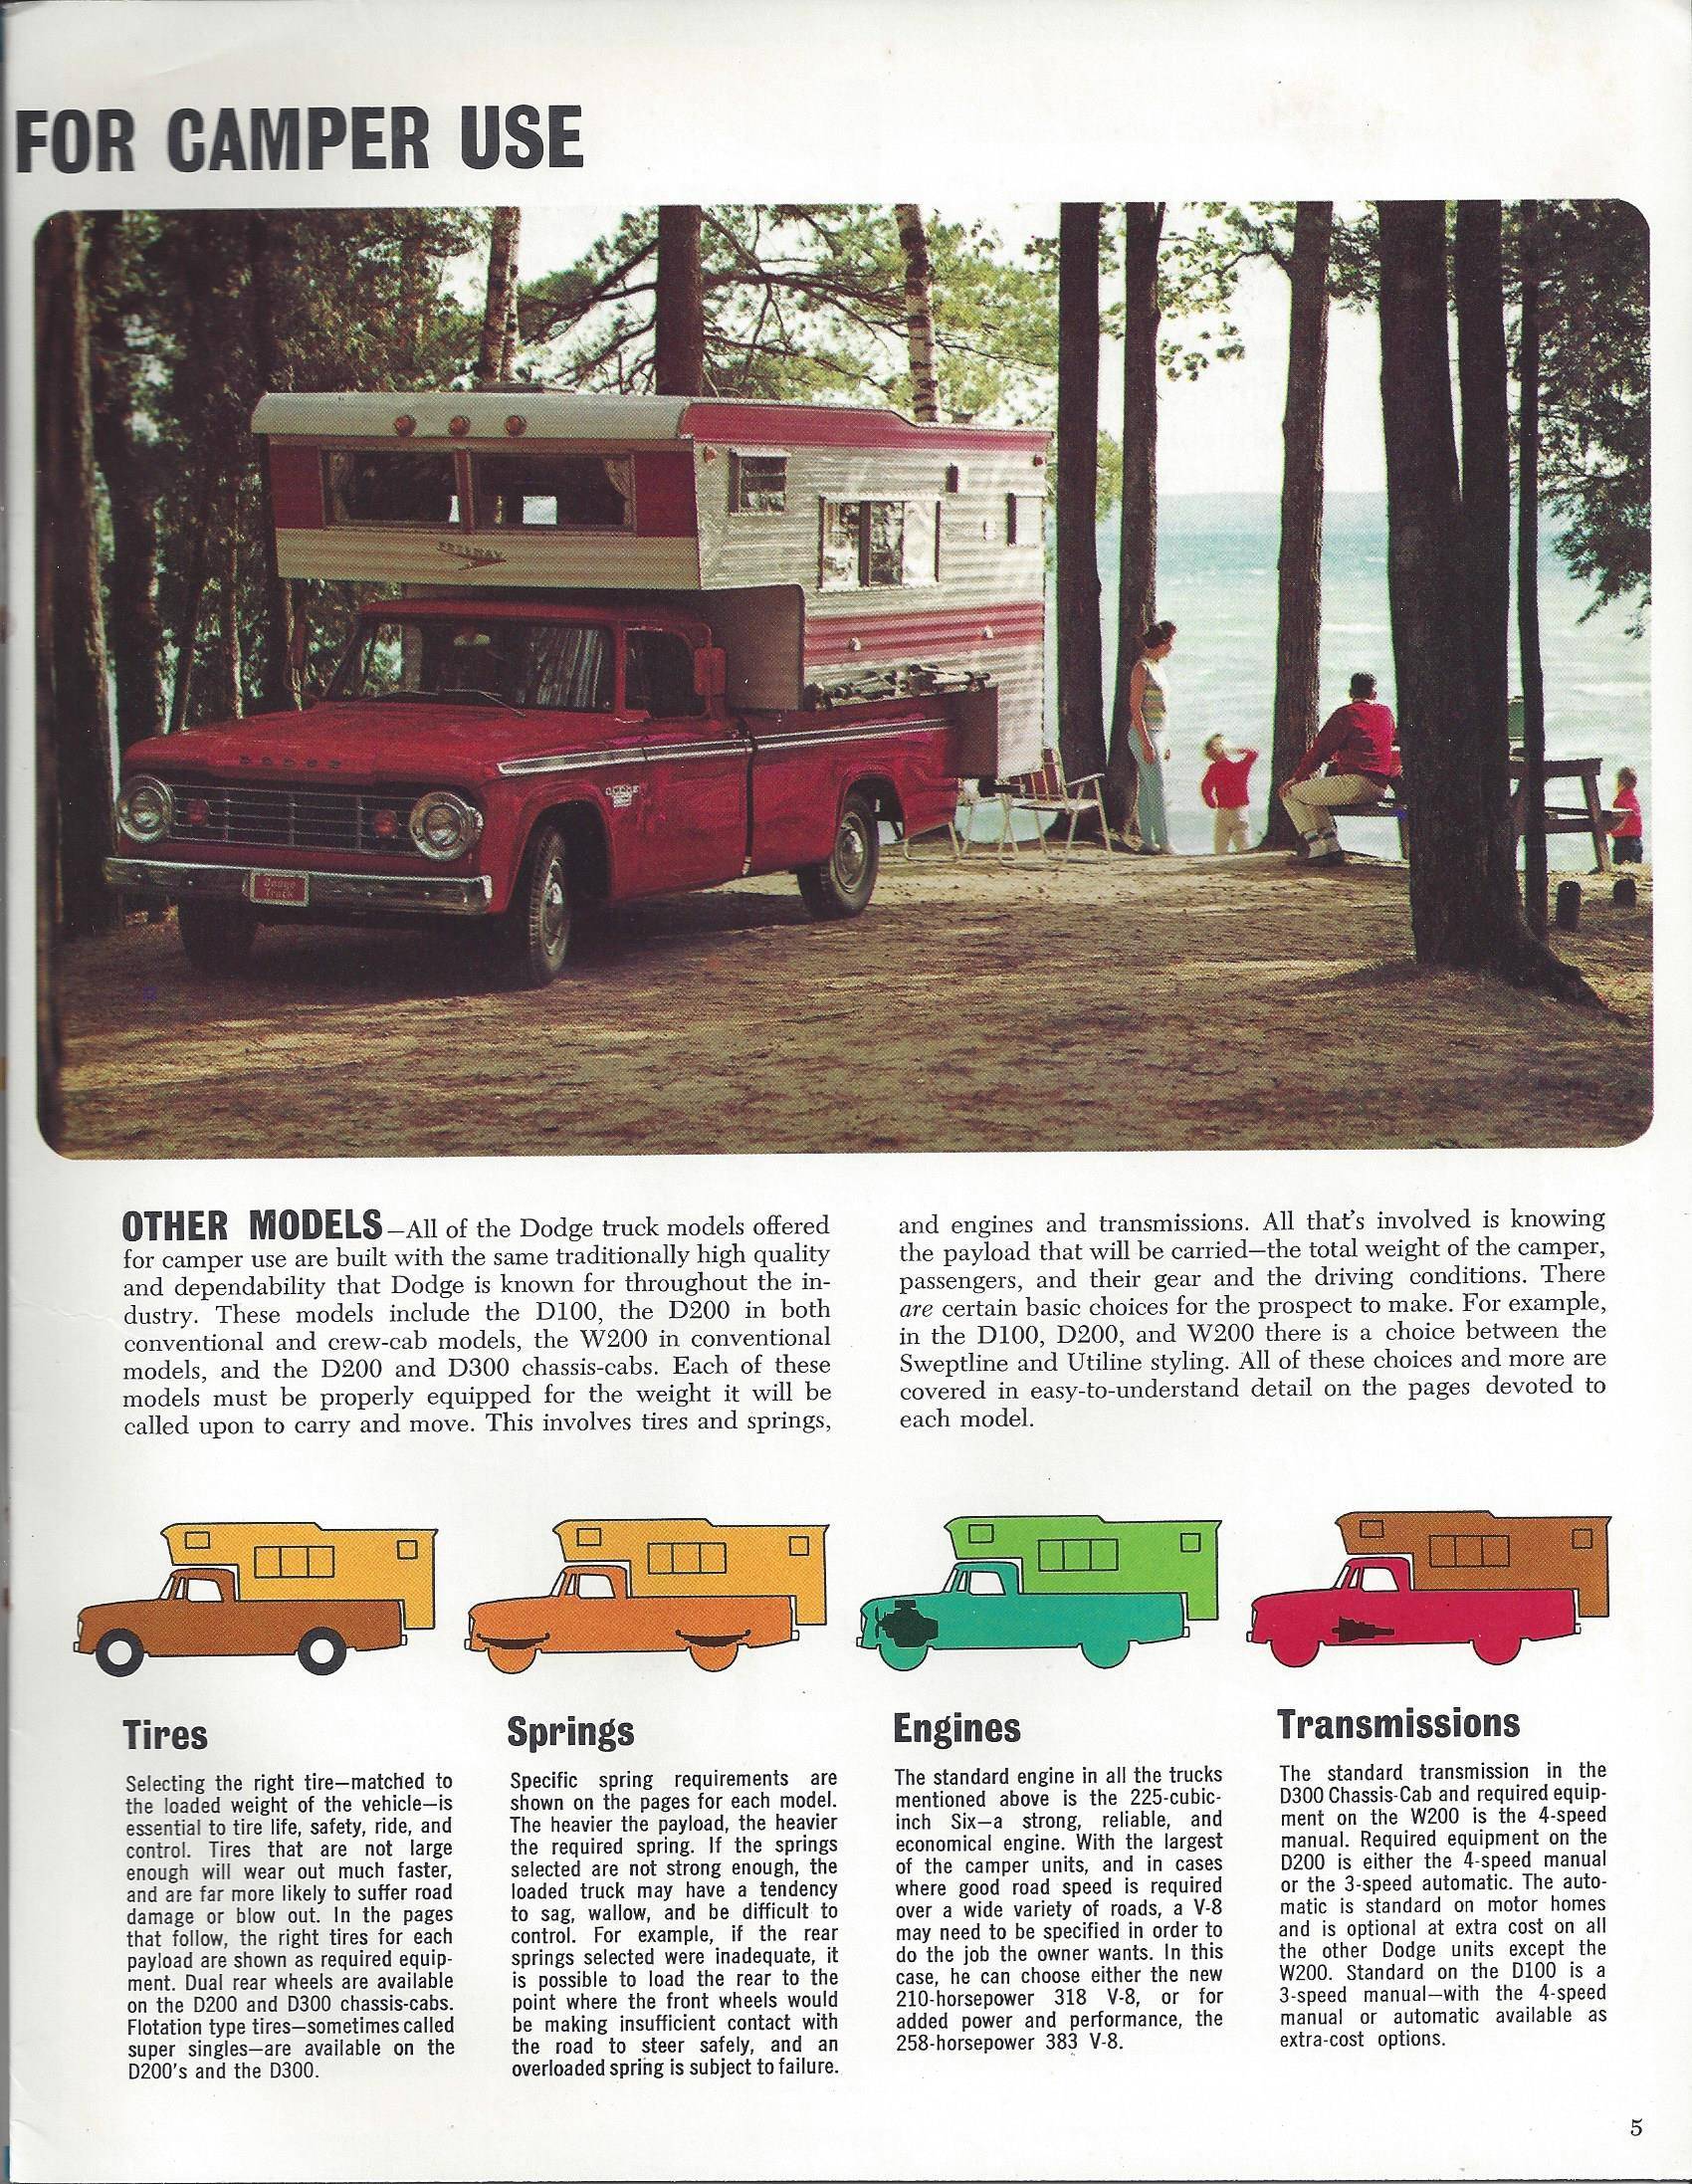 Go Camping With Dodge - pg 05.jpg